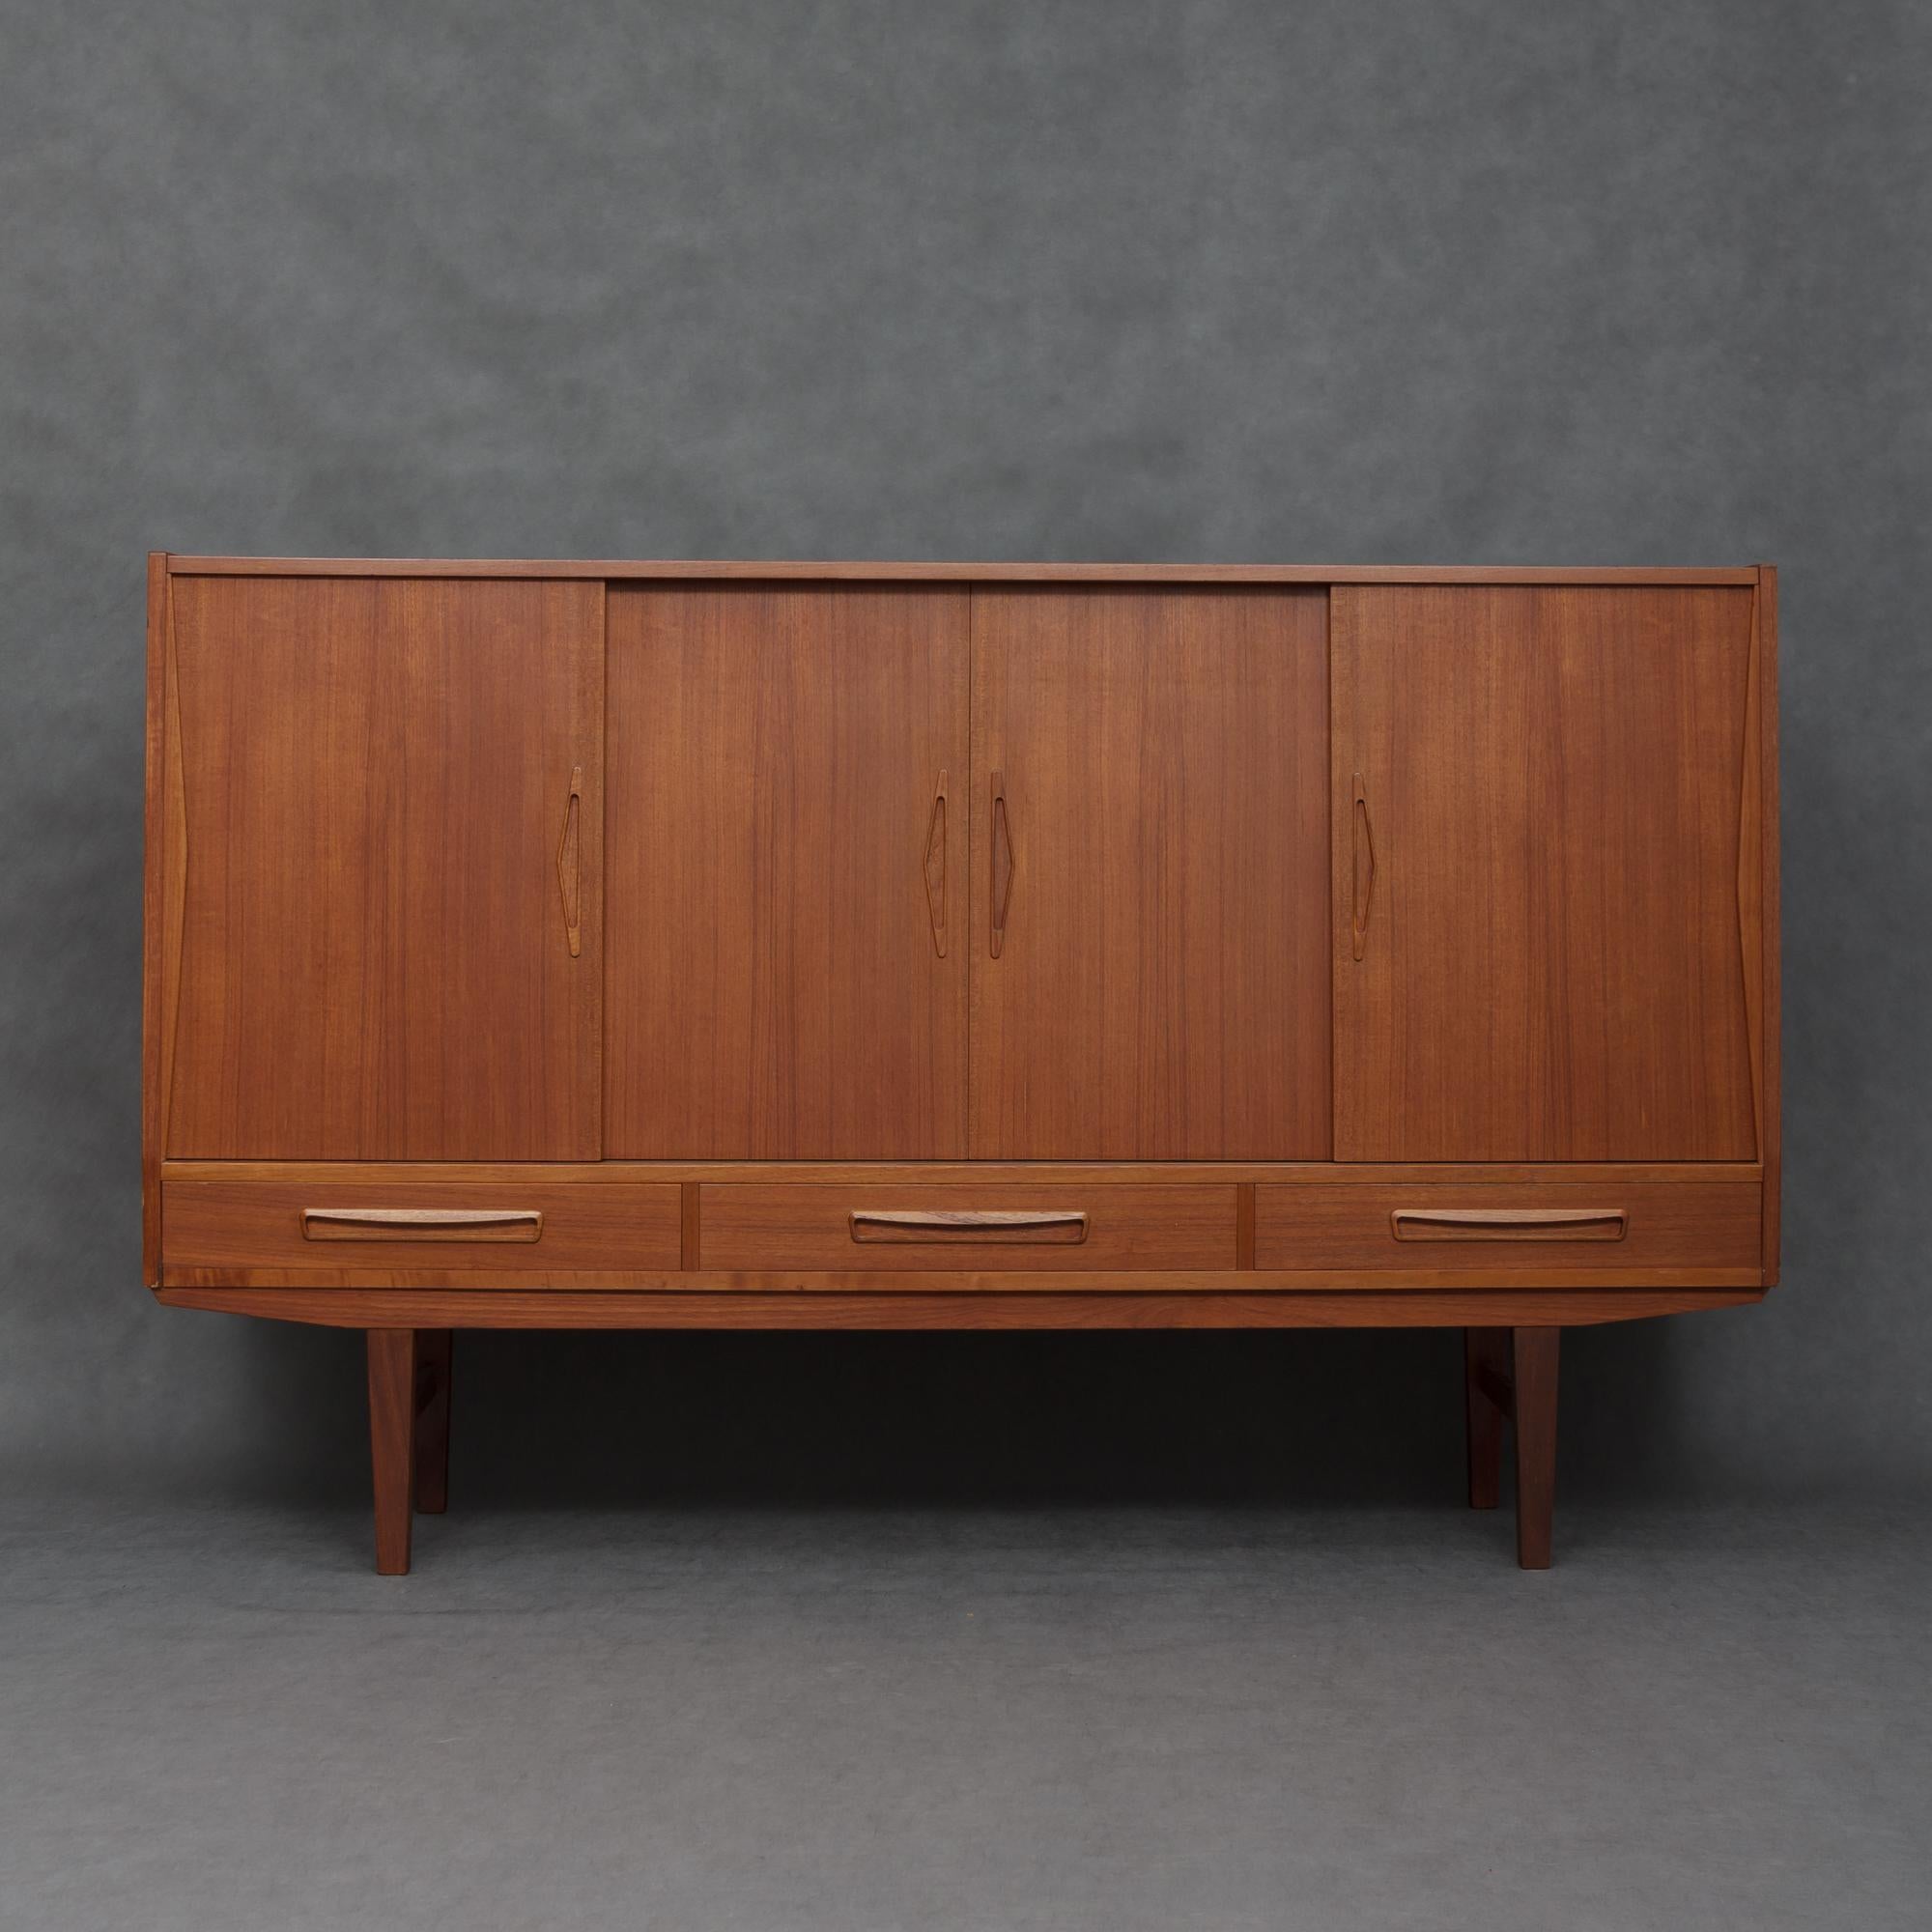 Danish Teak Highboard with a Lighted Bar from 1960s For Sale 5